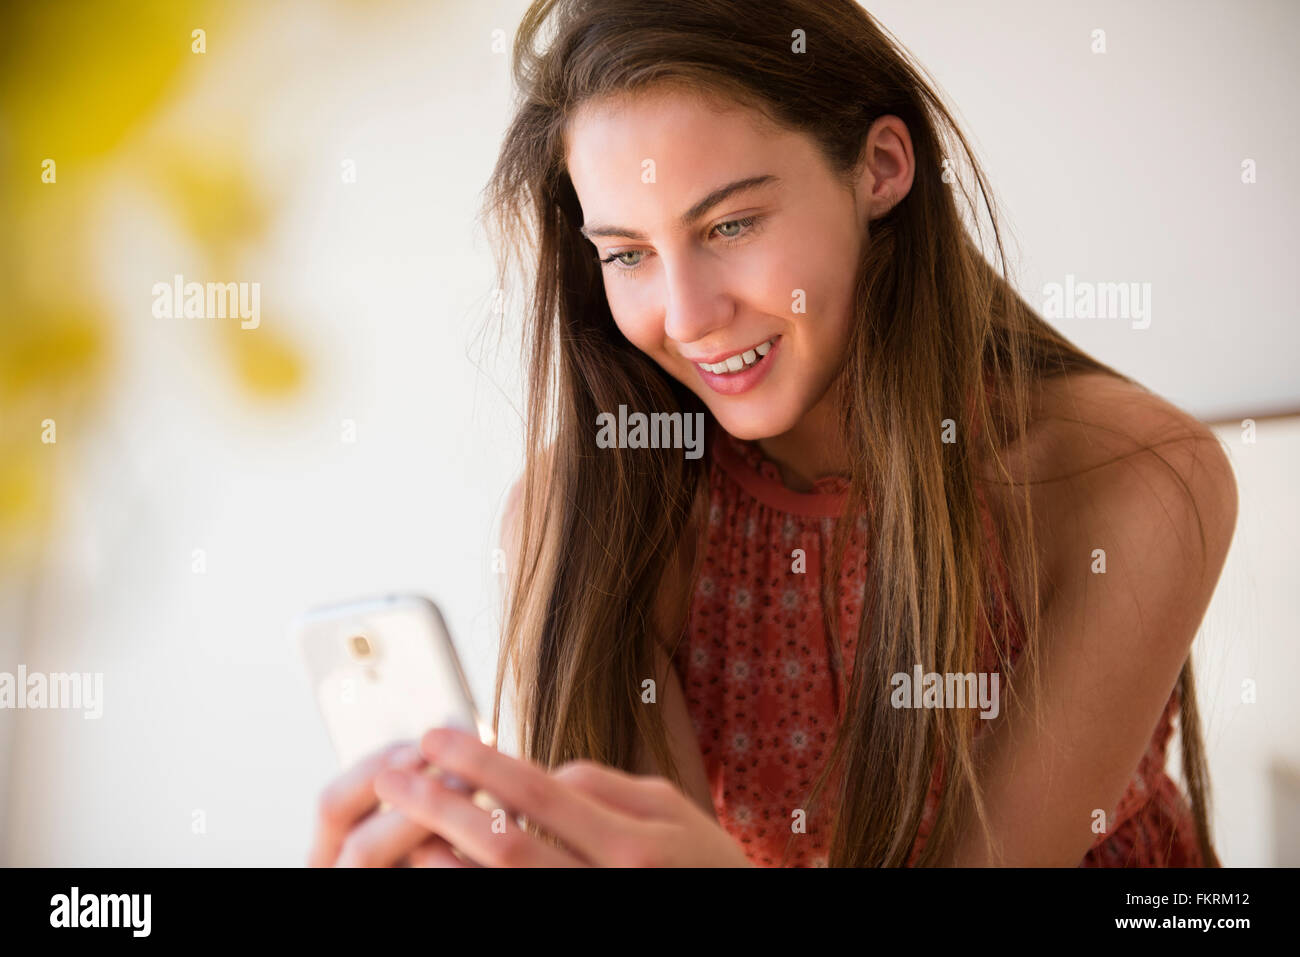 Native American woman using cell phone Stock Photo